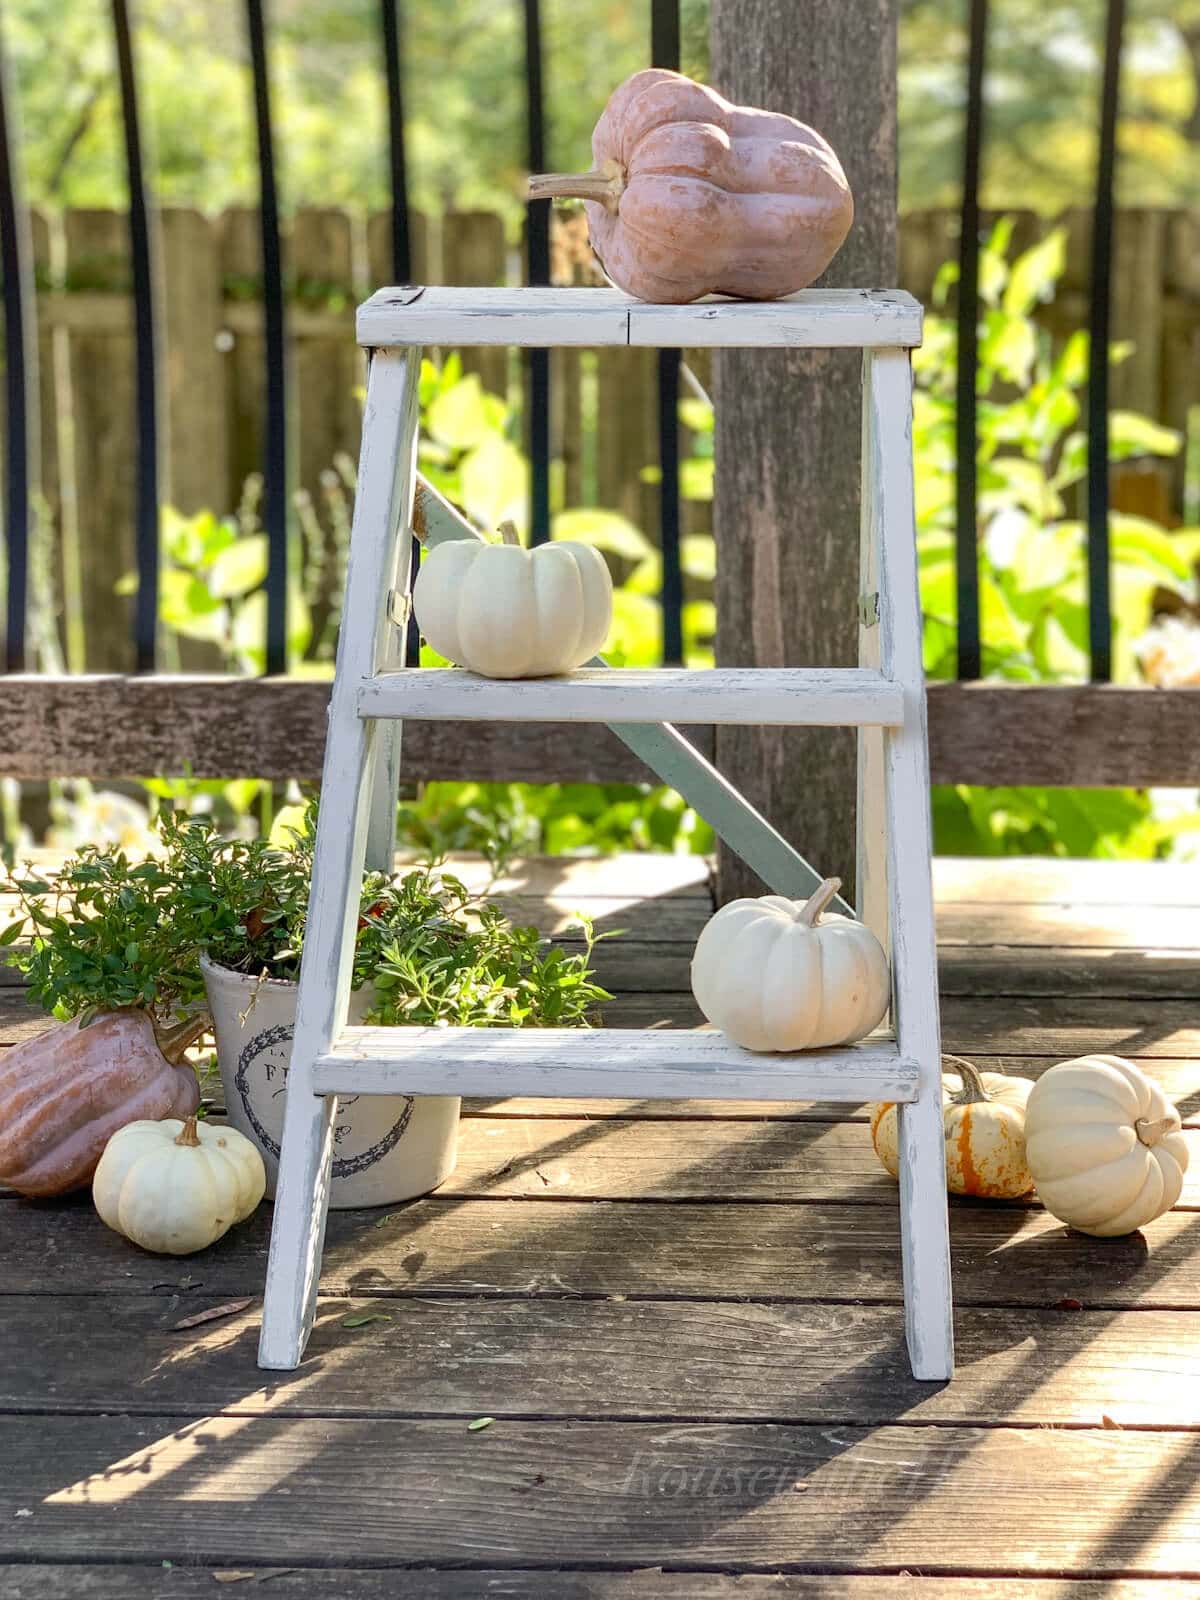 Fall deck decorating with small pumpkins and gourds on a rustic ladder.